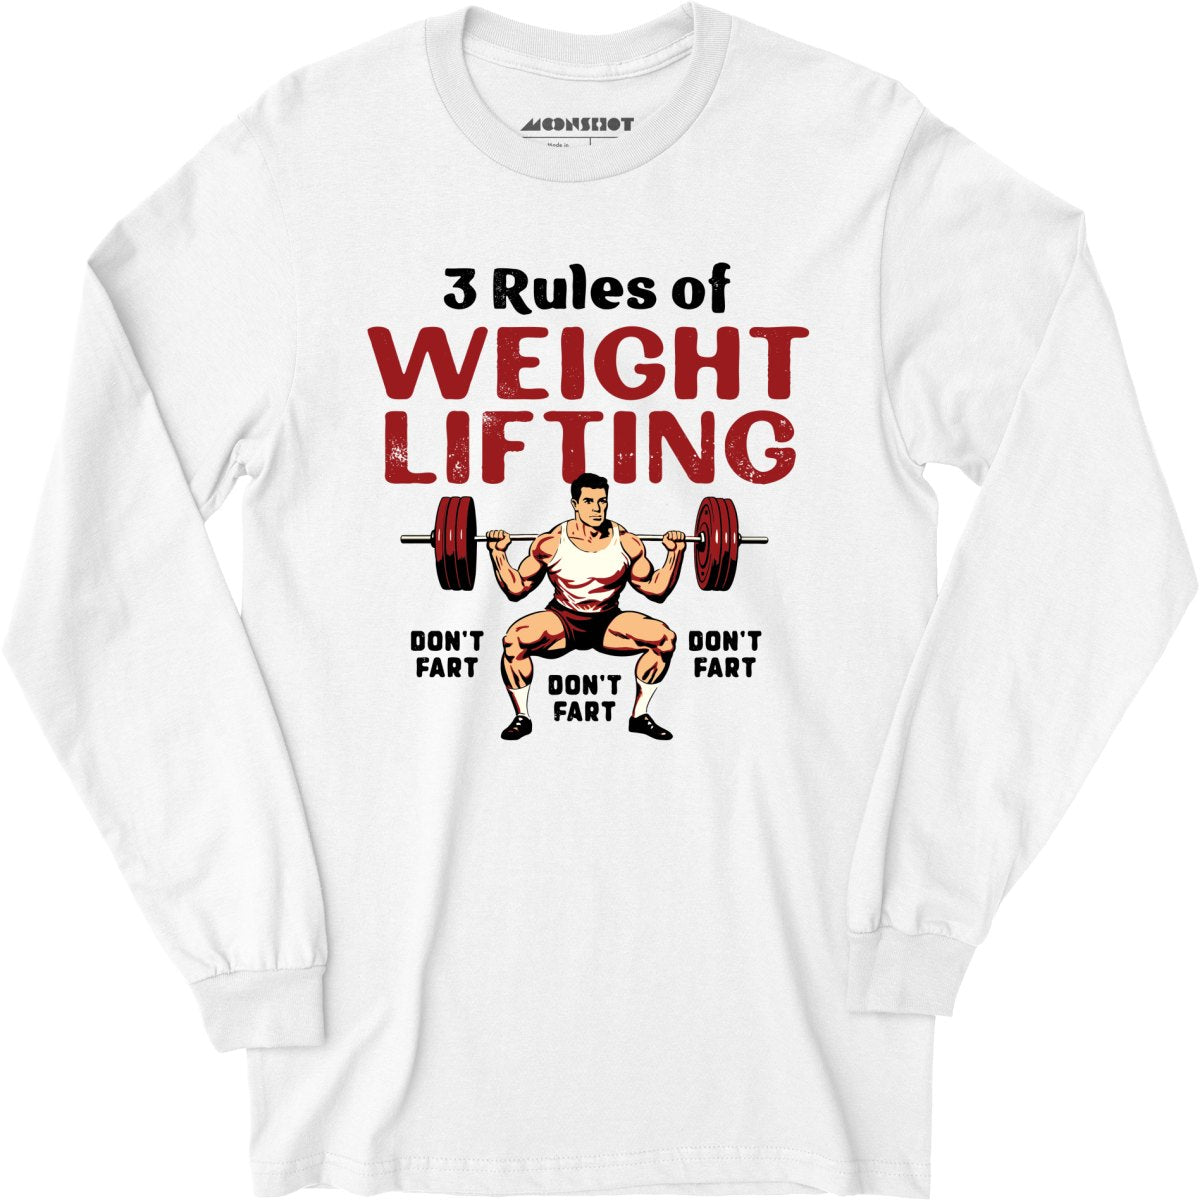 3 Rules of Weightlifting - Long Sleeve T-Shirt